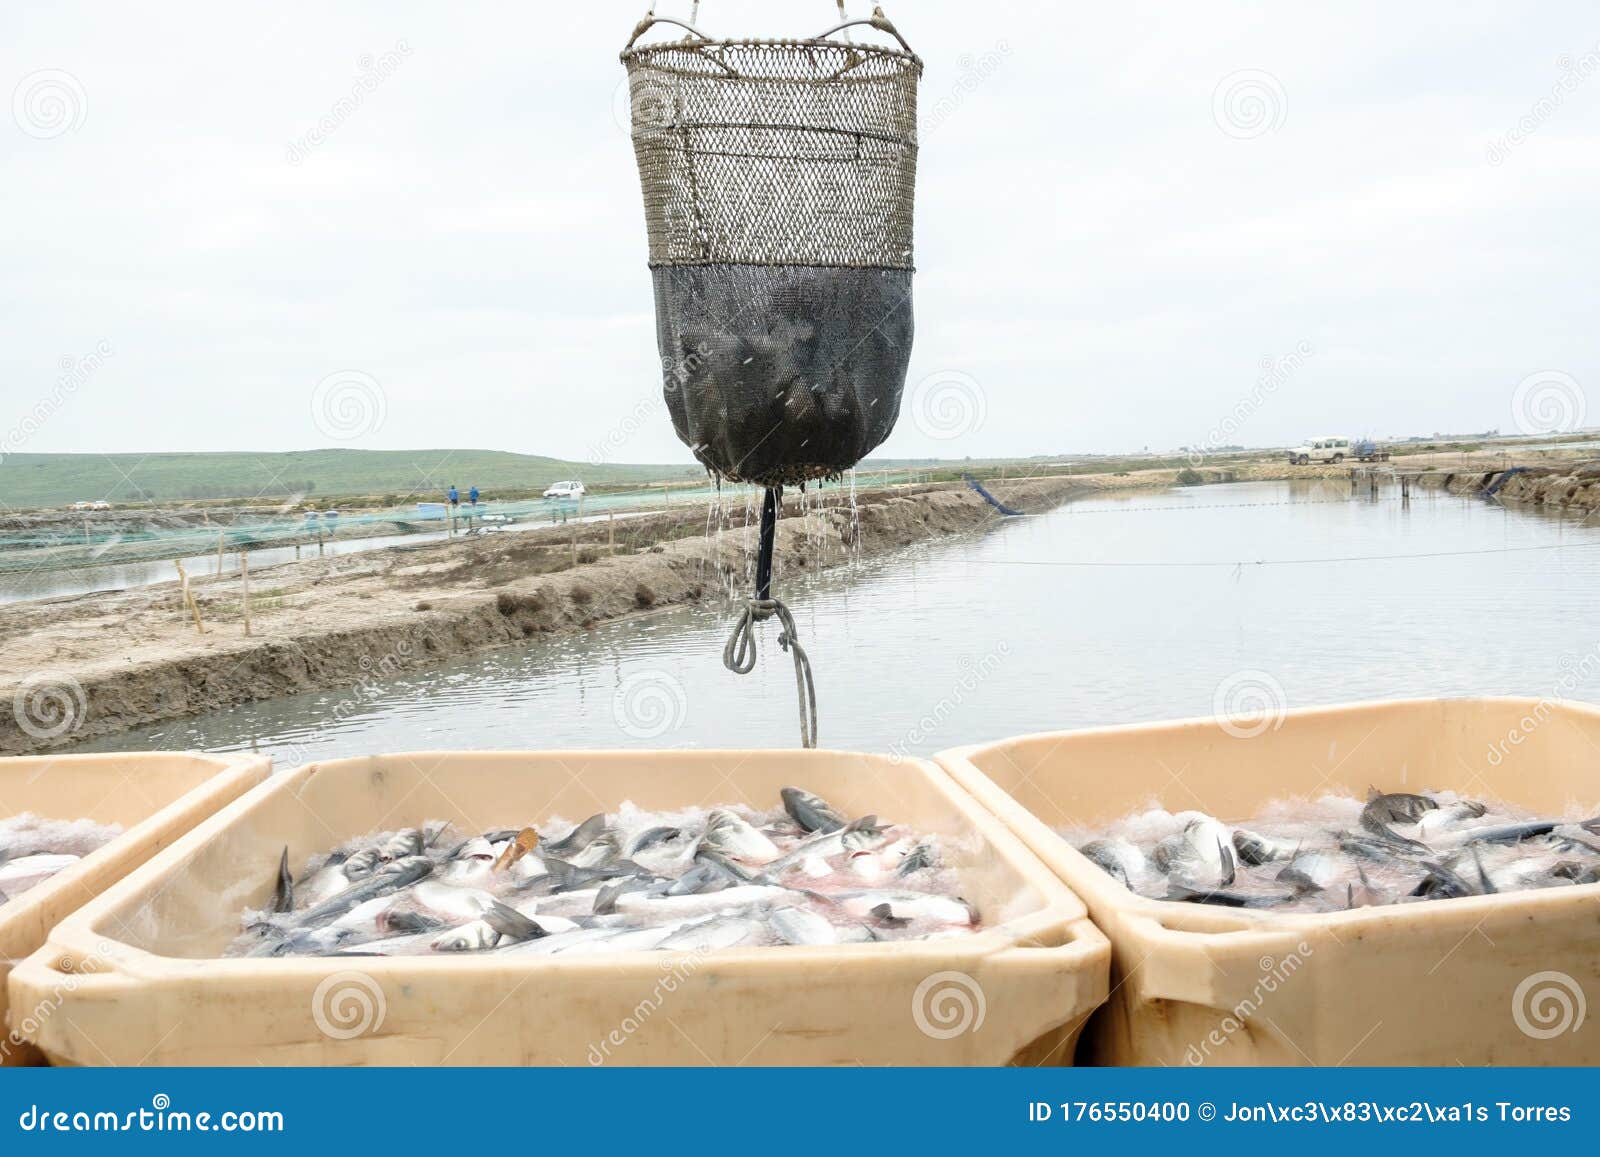 Unloading Freshly Caught Fish with a Transport Basket Stock Photo - Image  of apparatus, sorting: 176550400